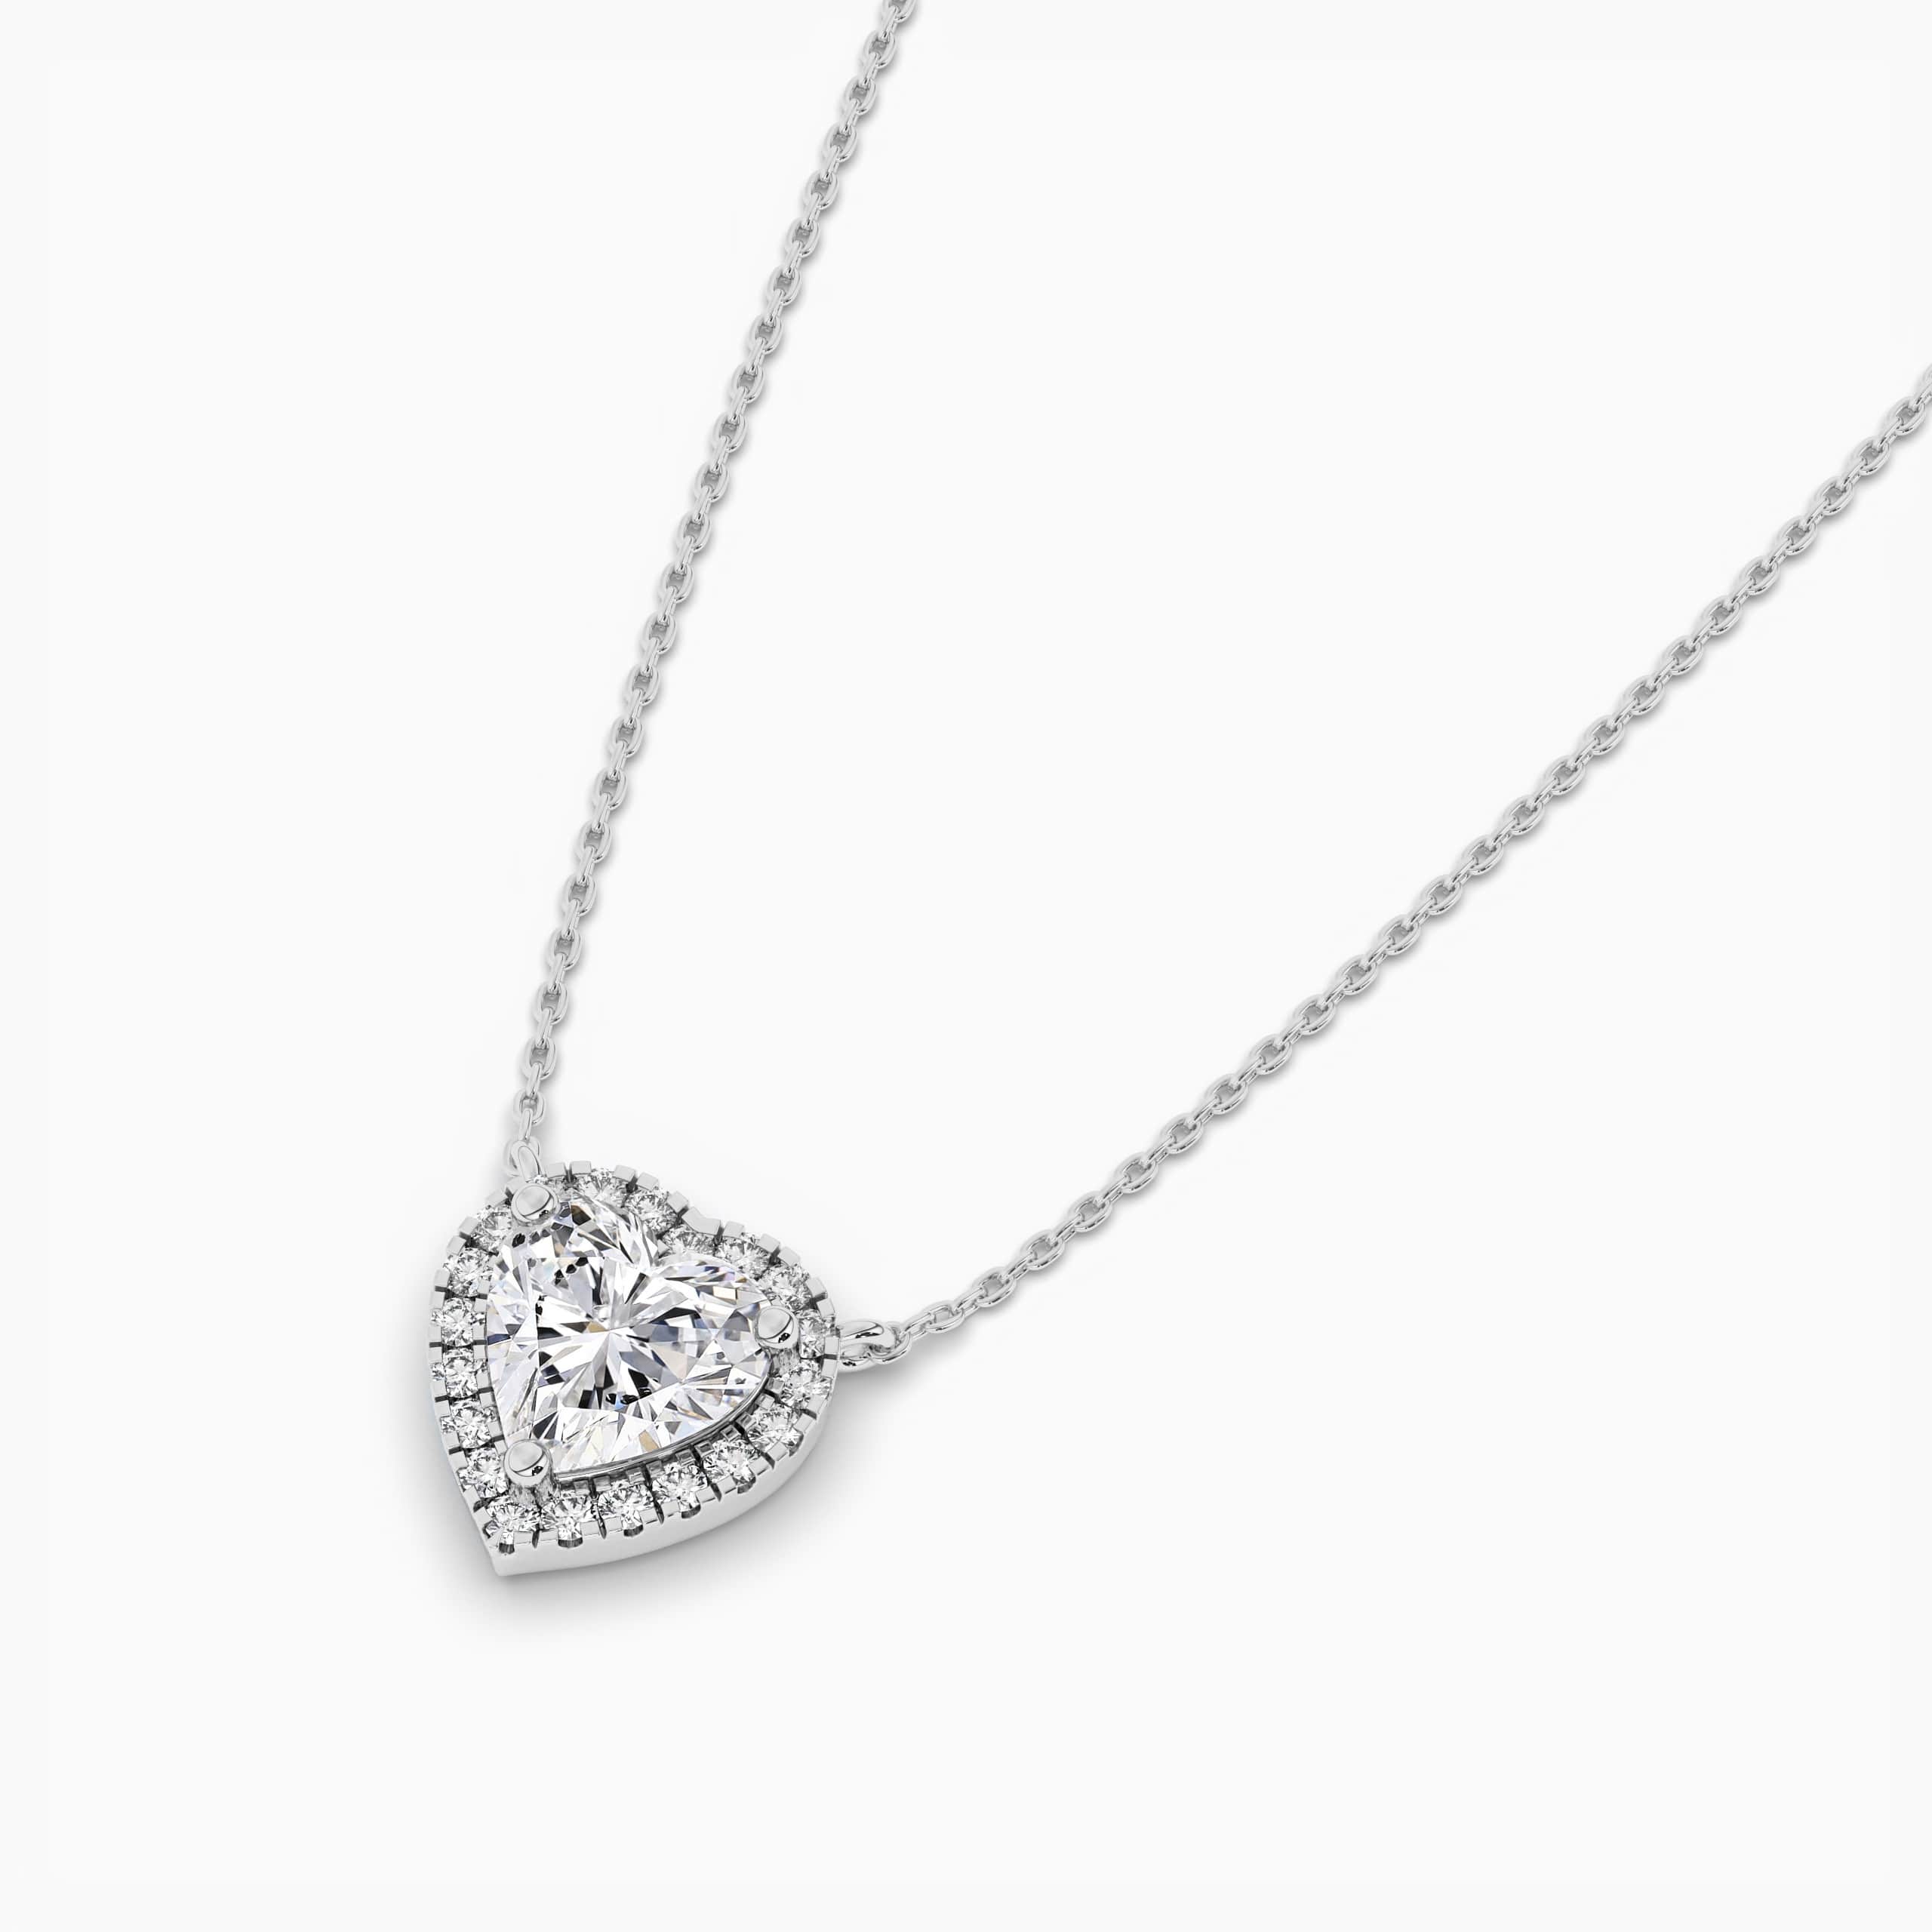 WHITE GOLD NECKLACE WITH HEART SHAPED DIAMOND HALO PENDANT